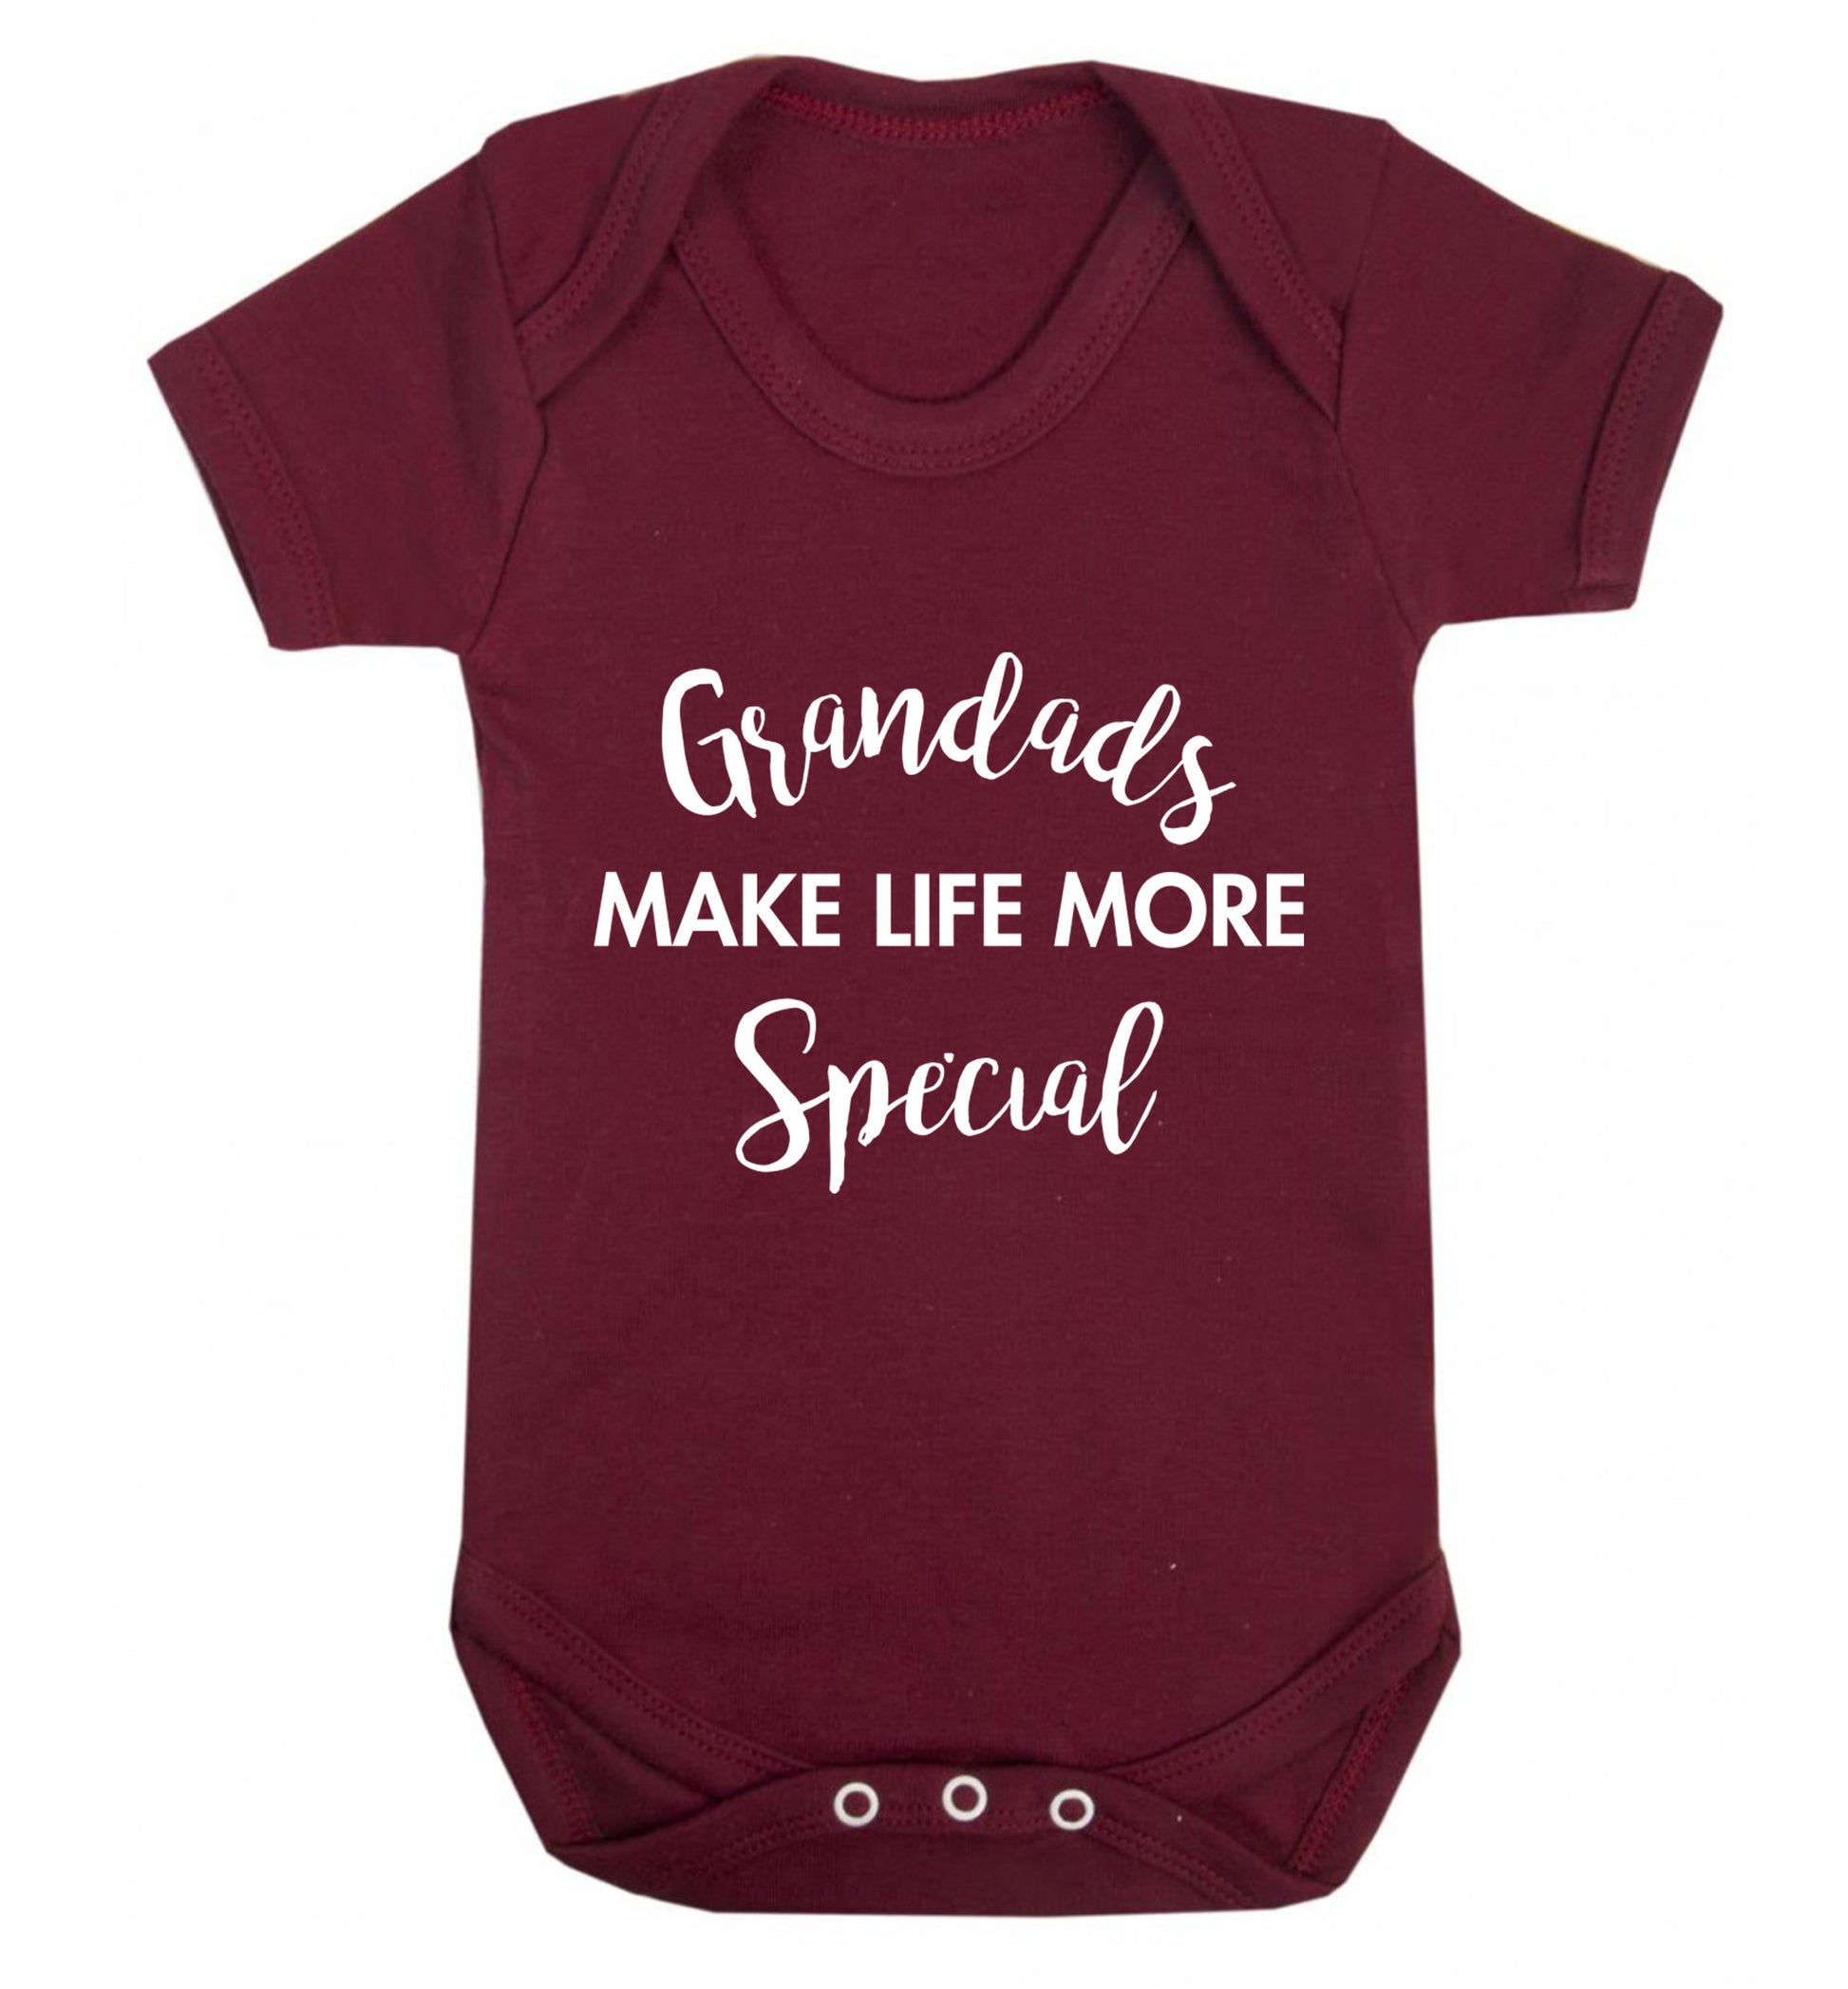 Grandads make life more special Baby Vest maroon 18-24 months